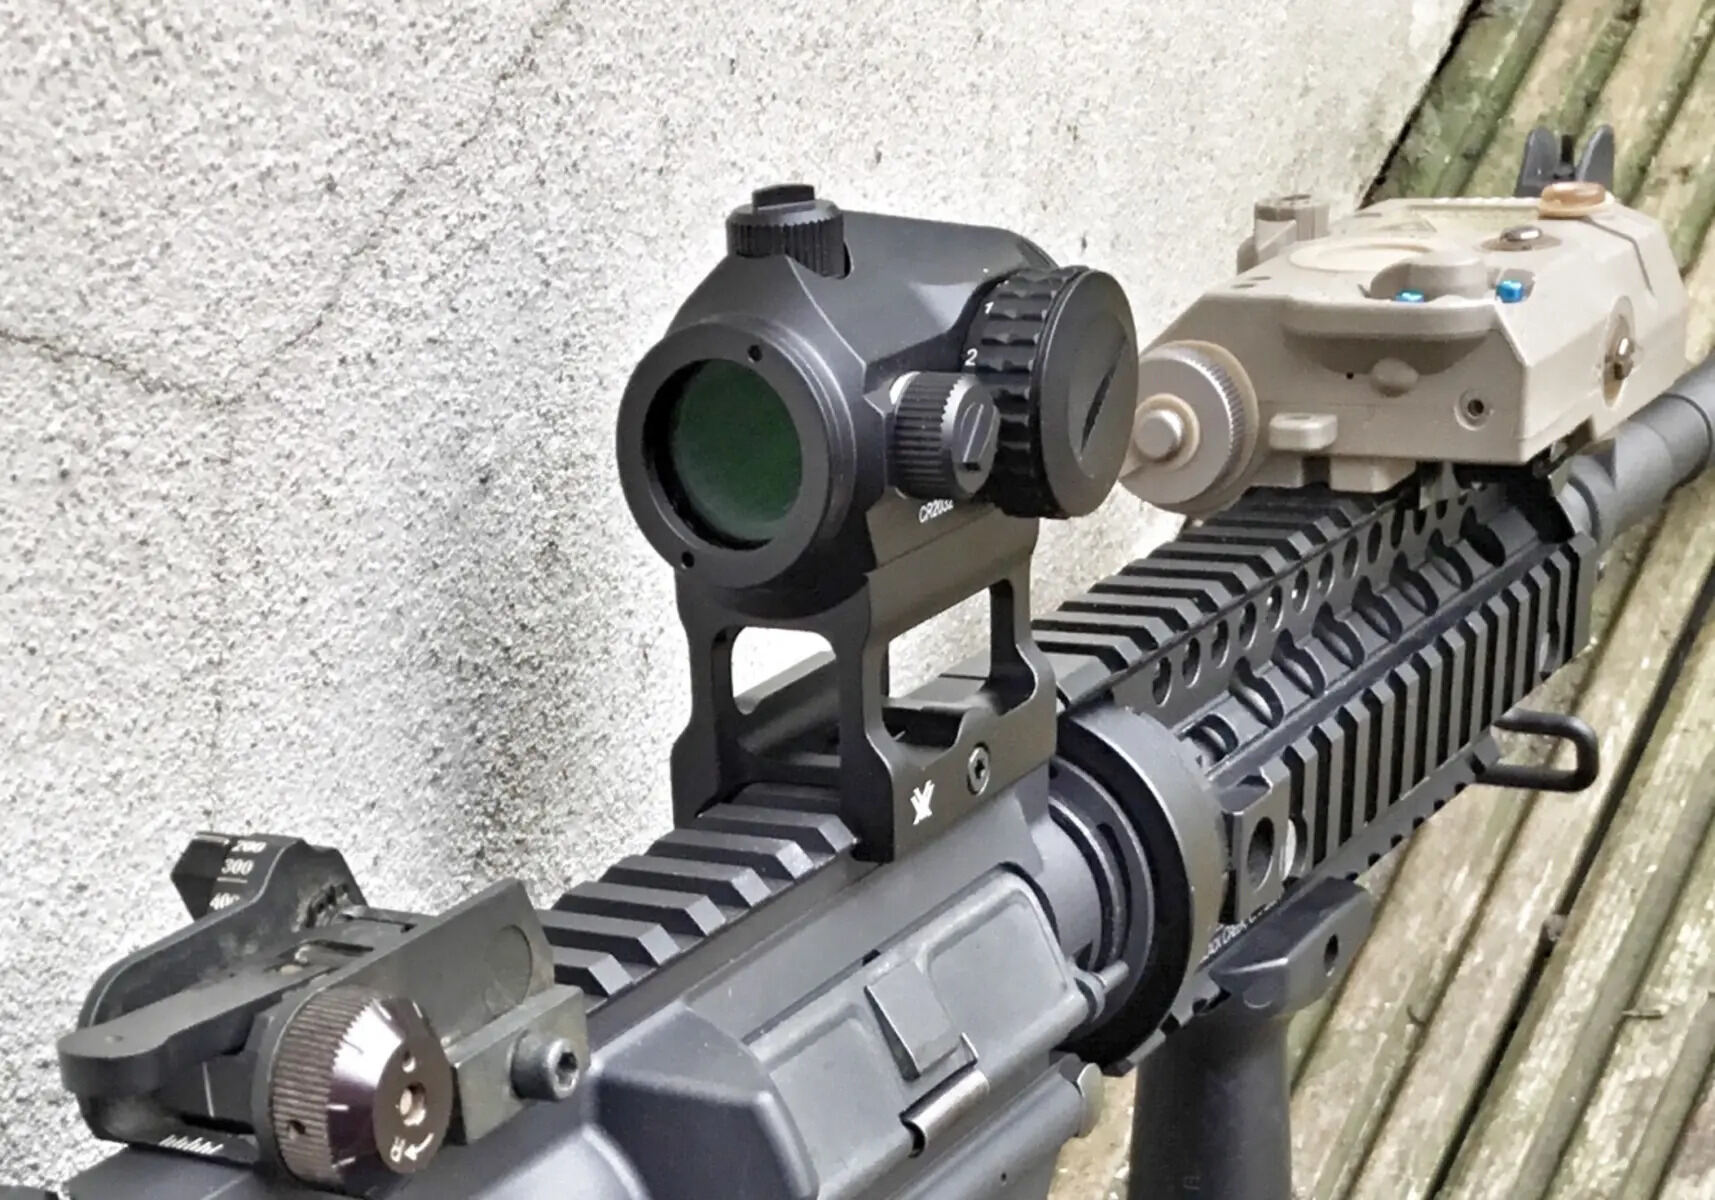 Vortex Sparc II: Selecting The Right Magnifier